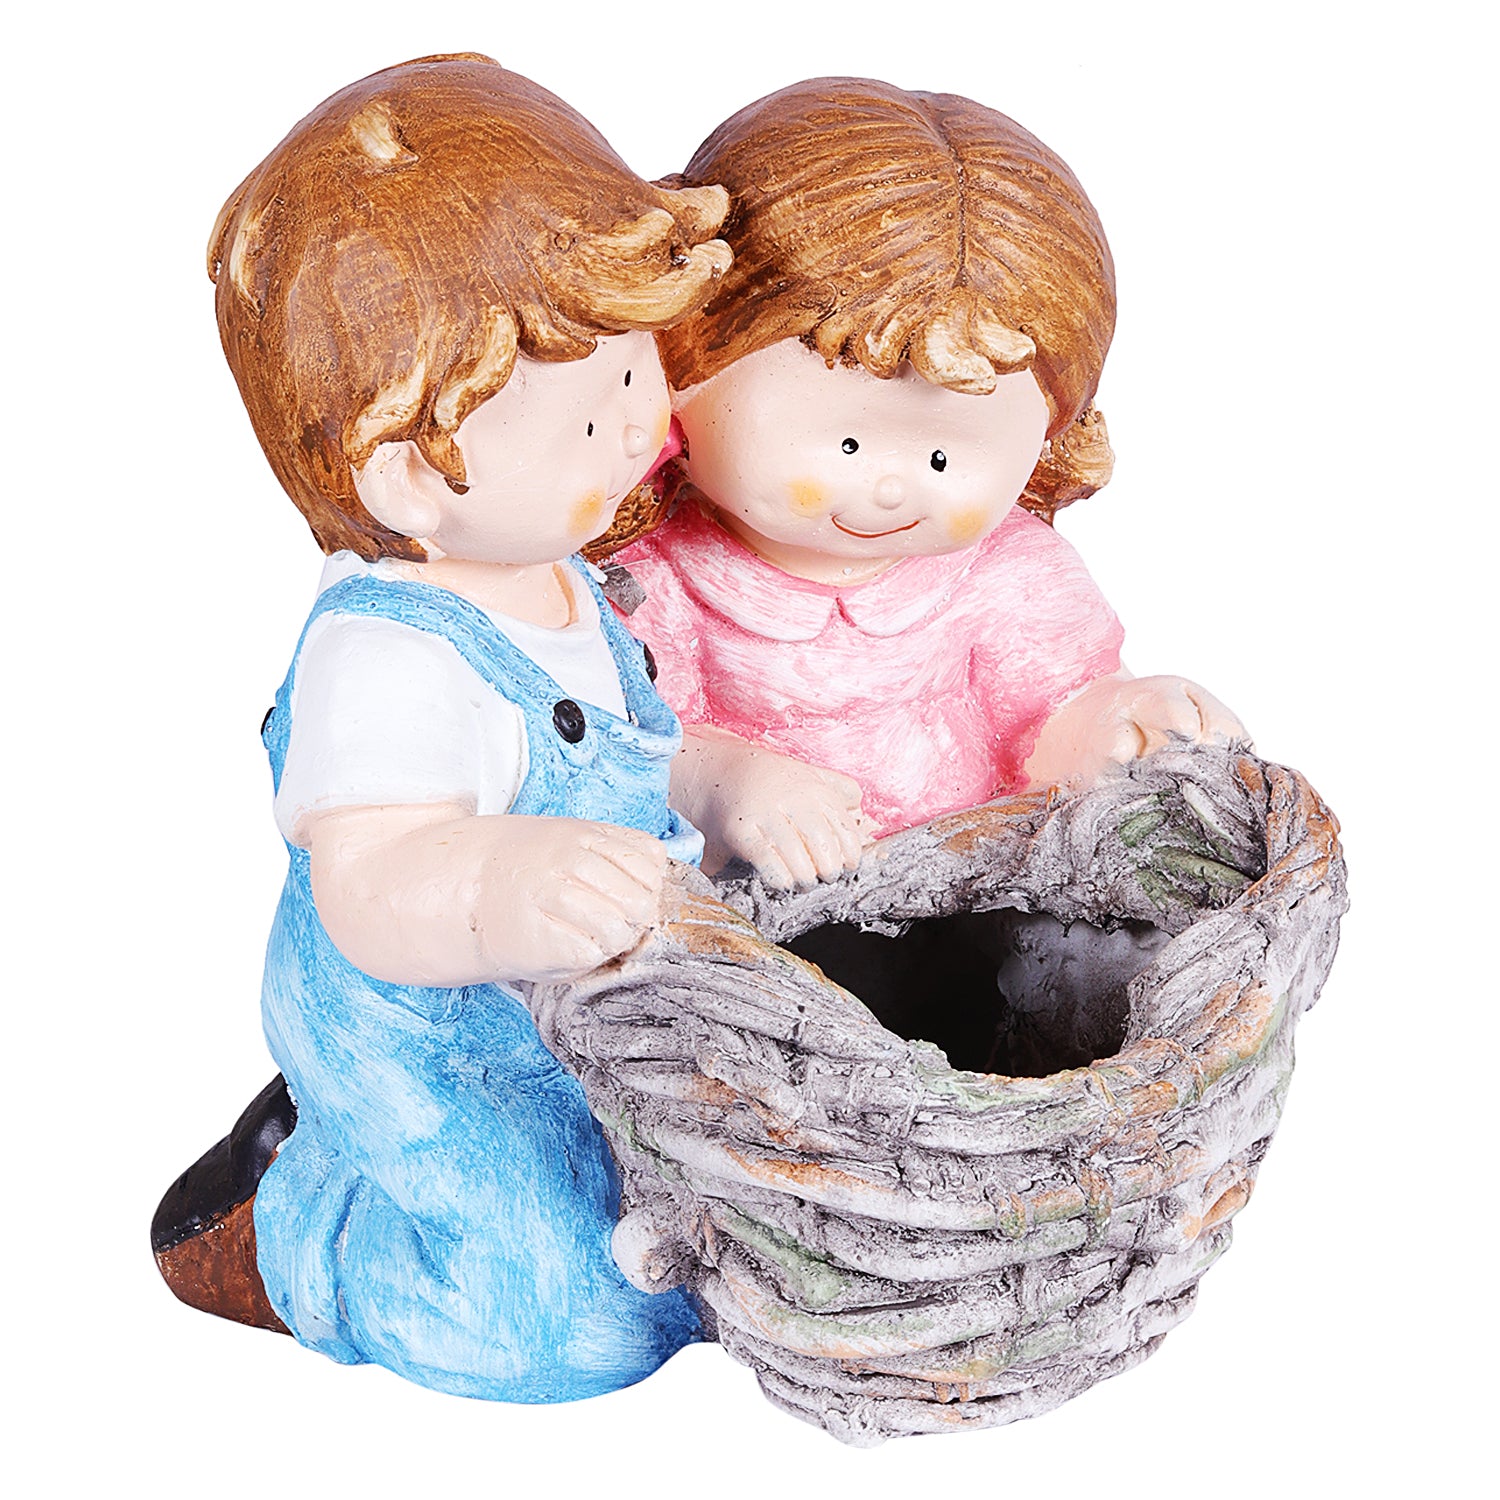 Lovely Kids standing together planter - myBageecha